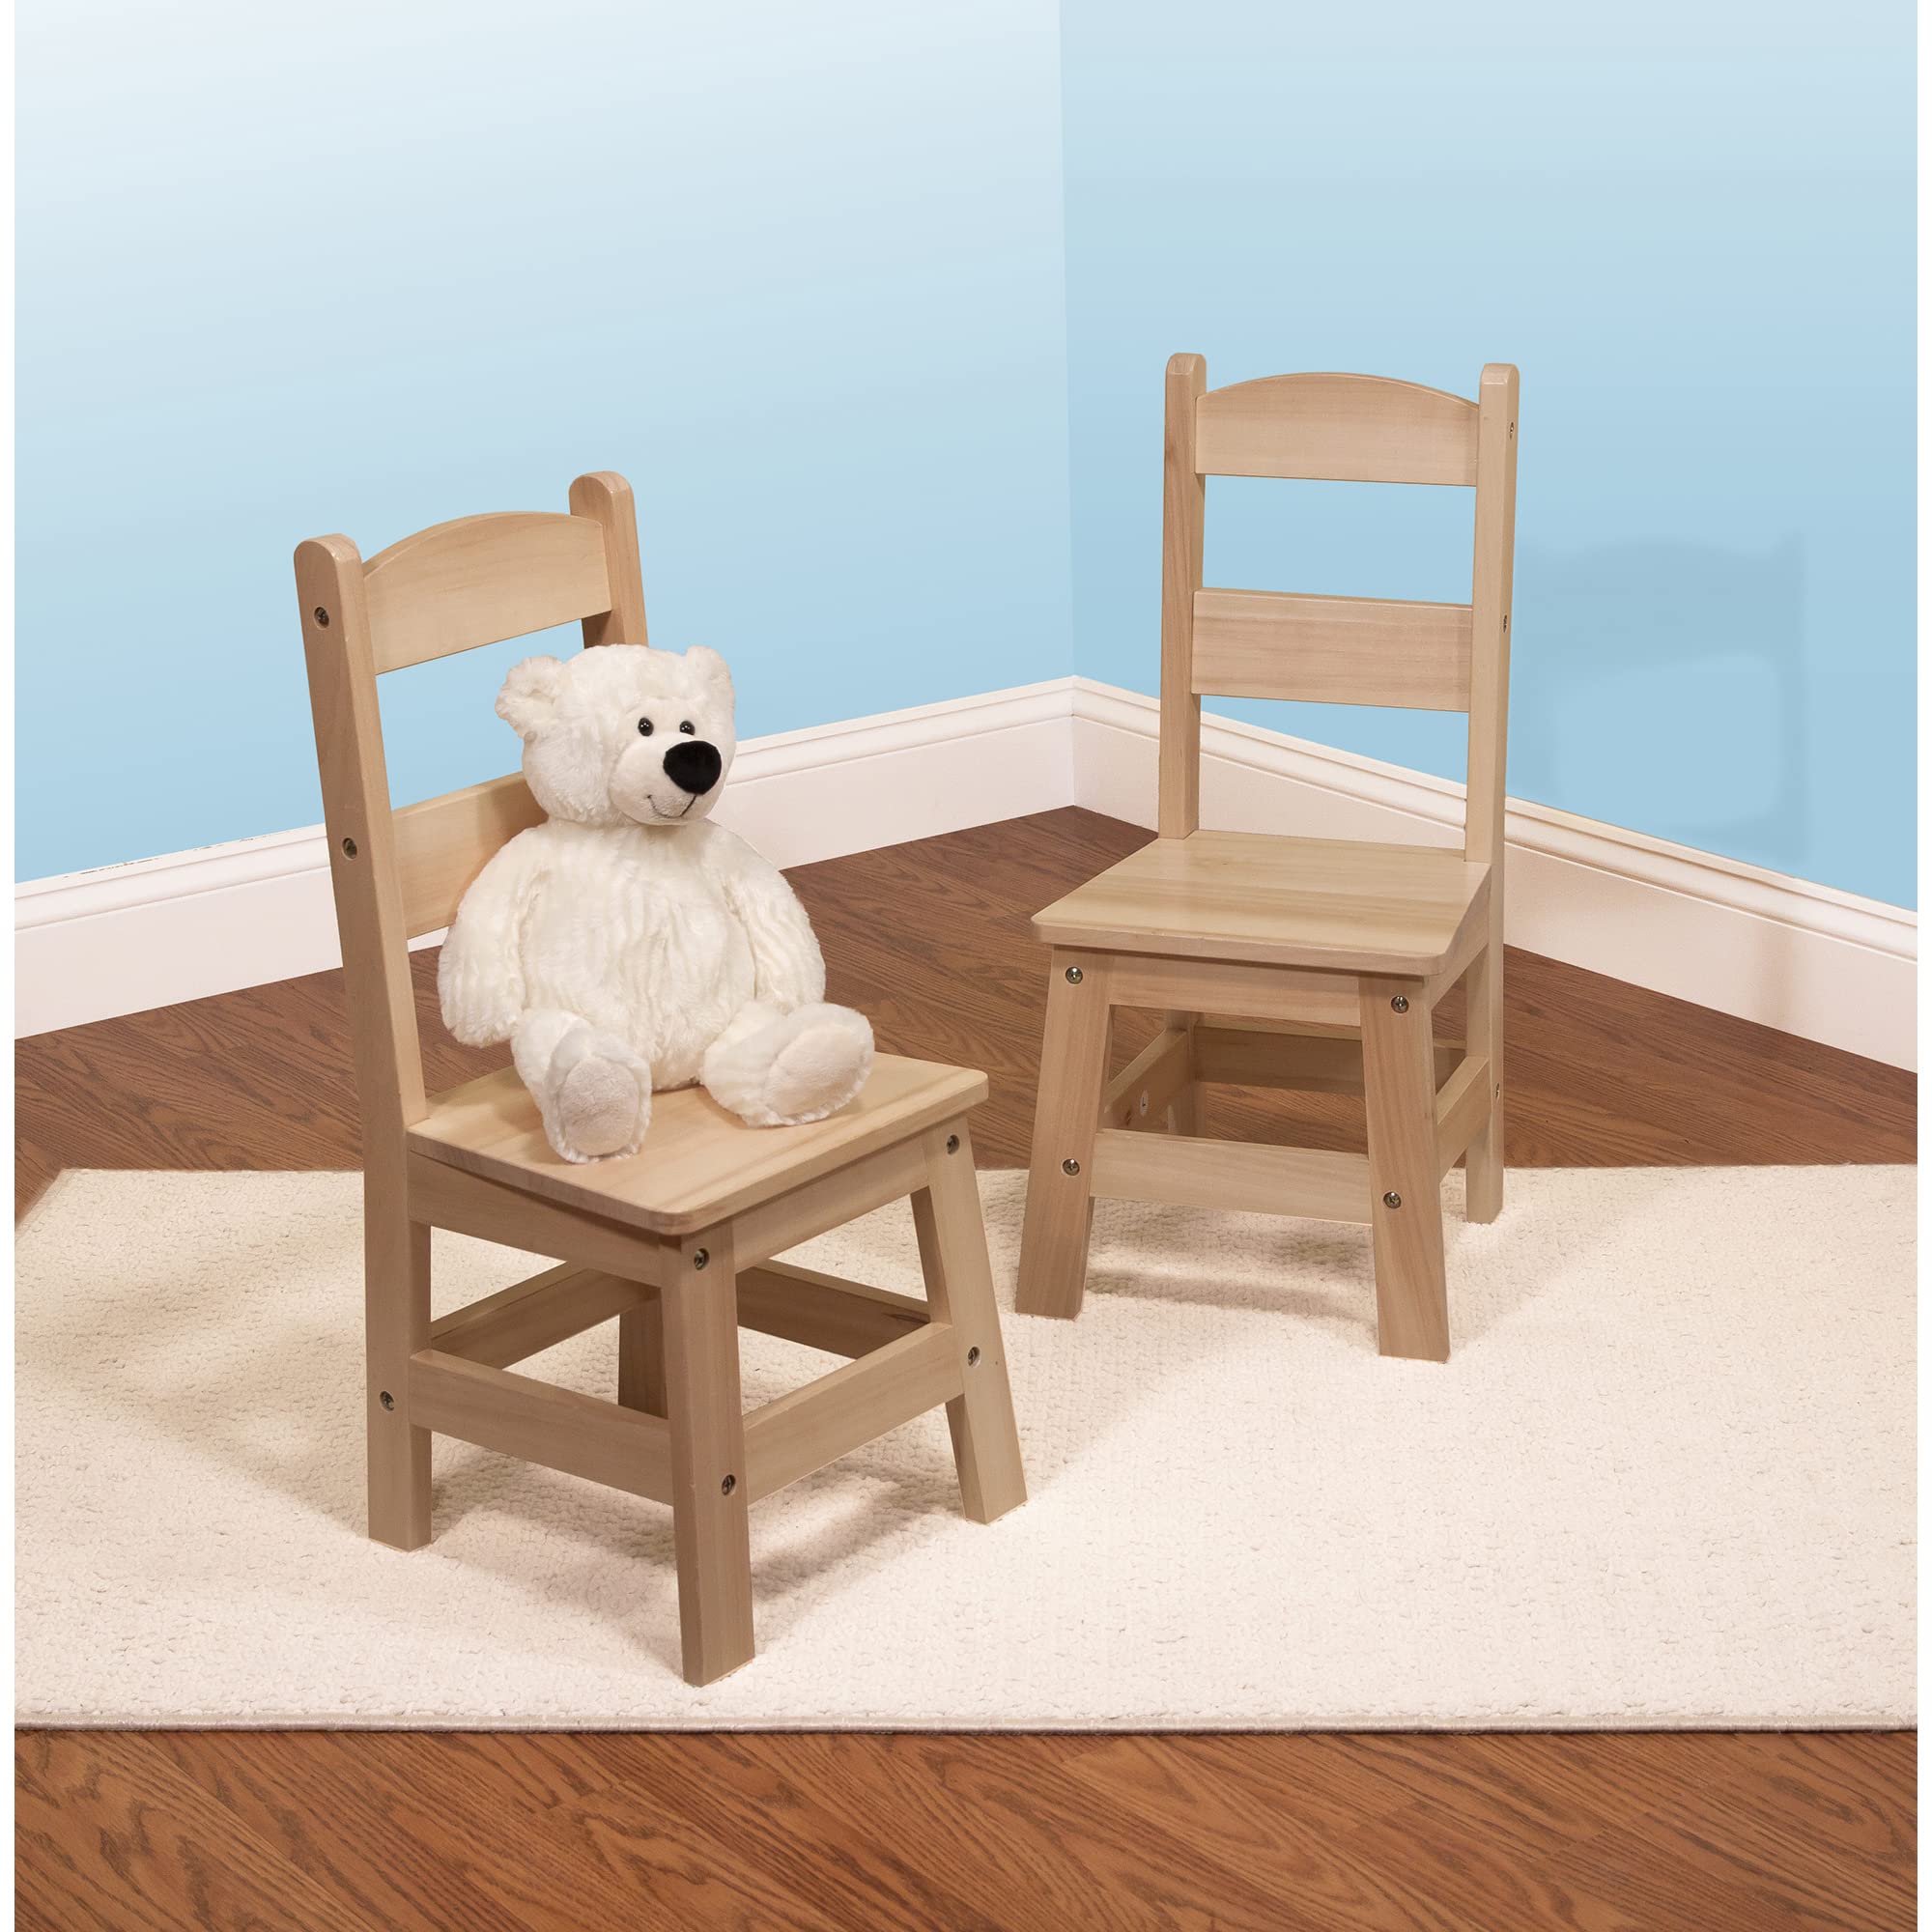 Melissa & Doug Wooden Chairs, Set of 2 - Blonde Furniture for Playroom - Kids Wooden Chairs, Children's Wooden Playroom Furniture